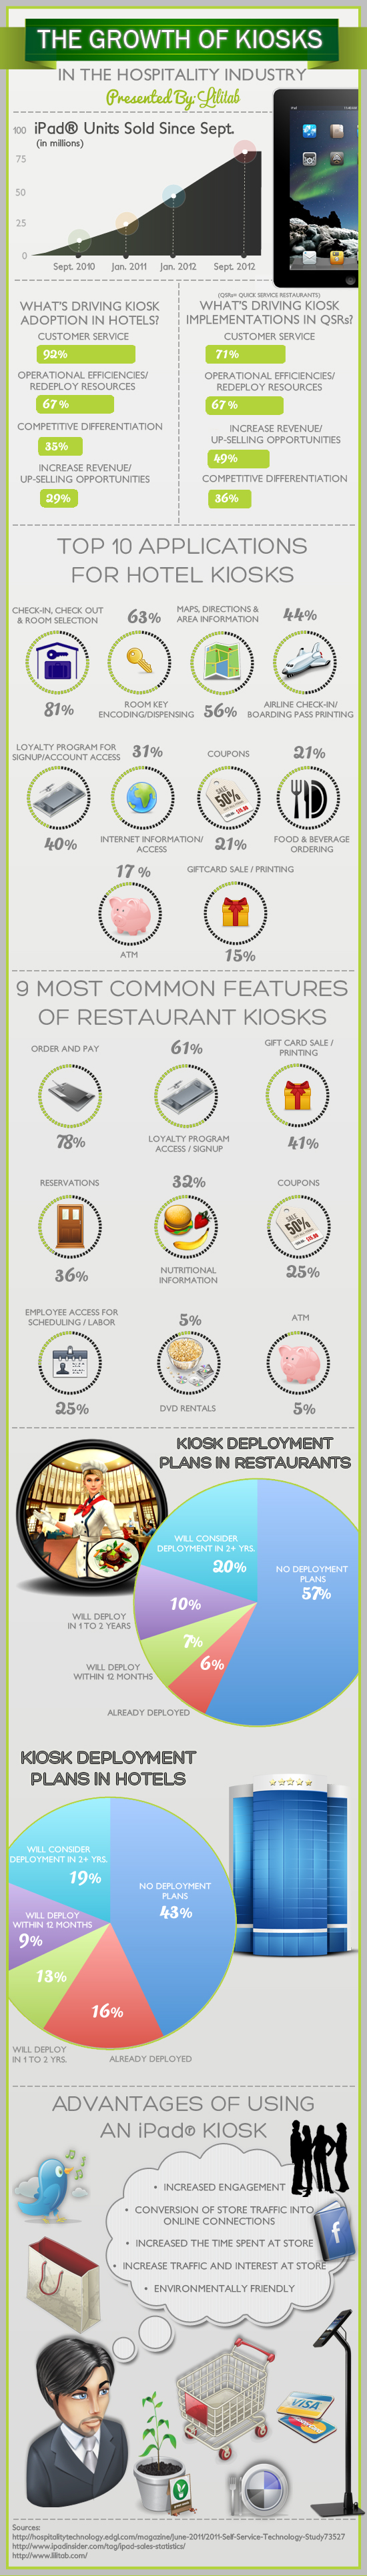 The Growth of Kiosks in the Hospitality Industry